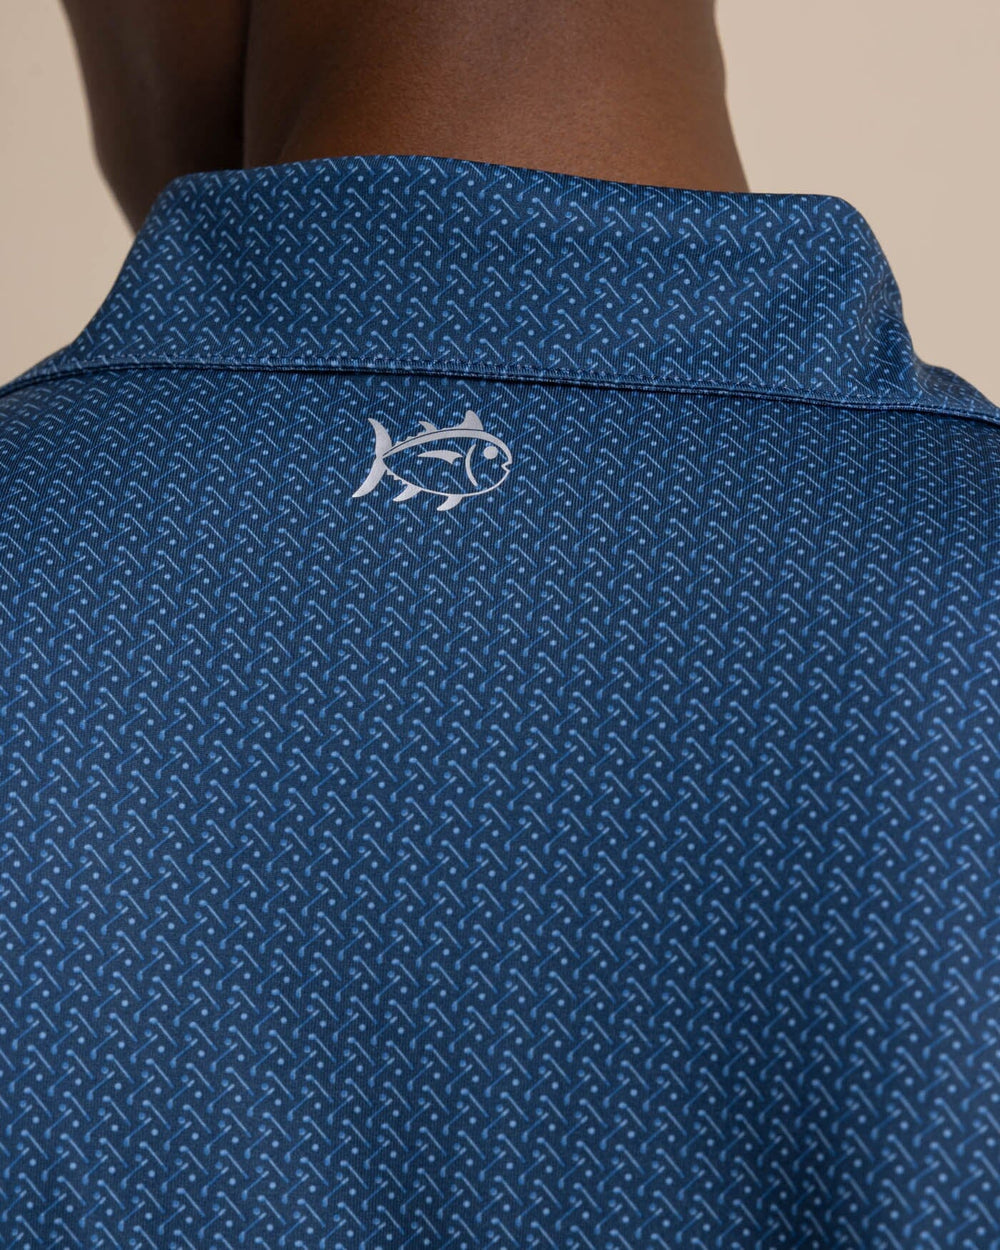 The detail view of the Southern Tide Driver Clubbin It Printed Polo by Southern Tide - Aged Denim